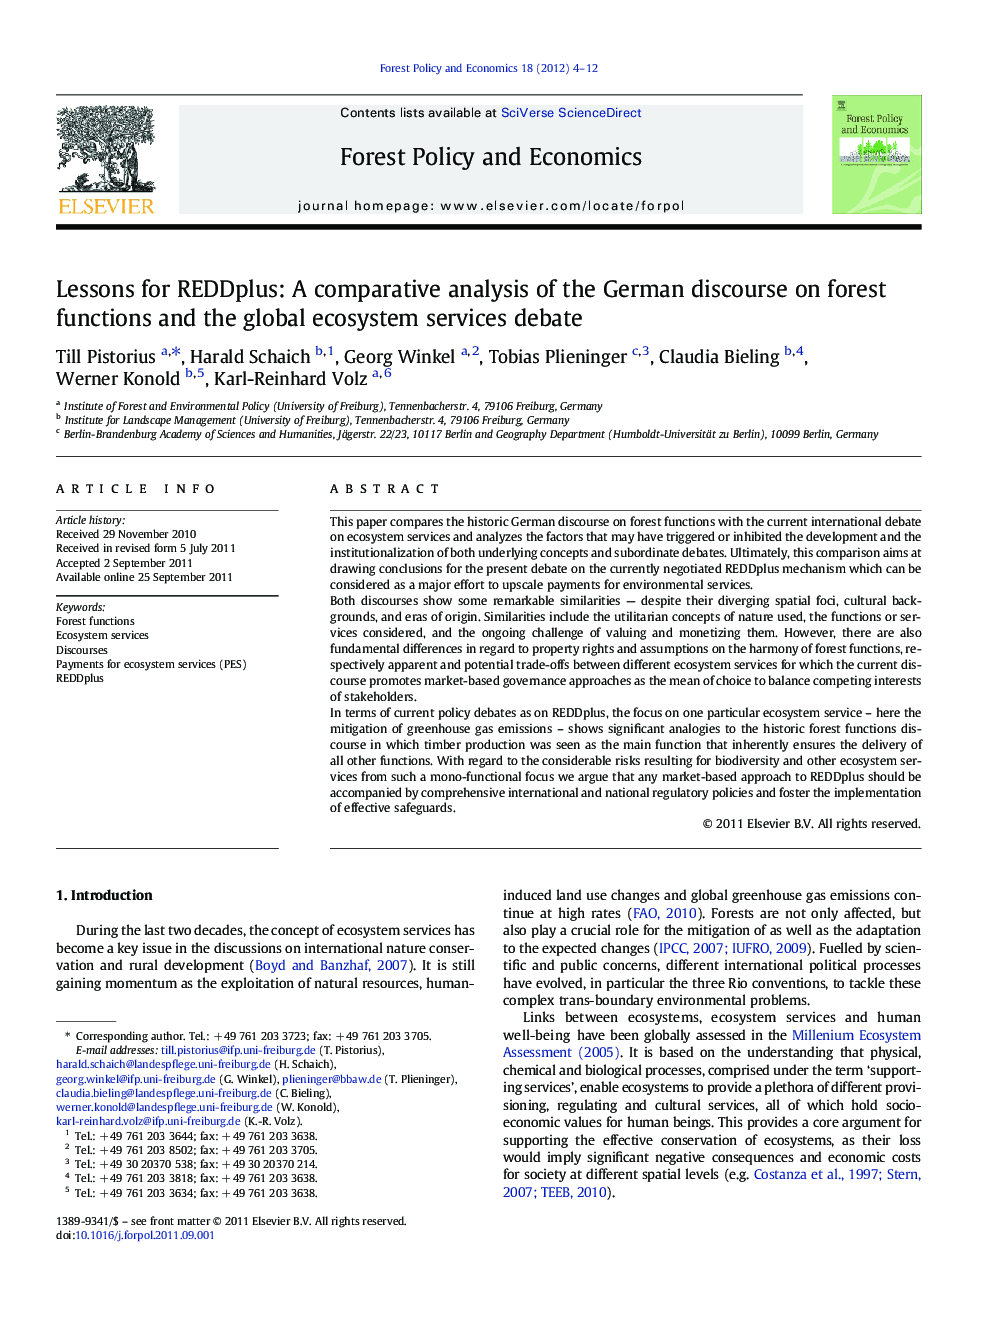 Lessons for REDDplus: A comparative analysis of the German discourse on forest functions and the global ecosystem services debate